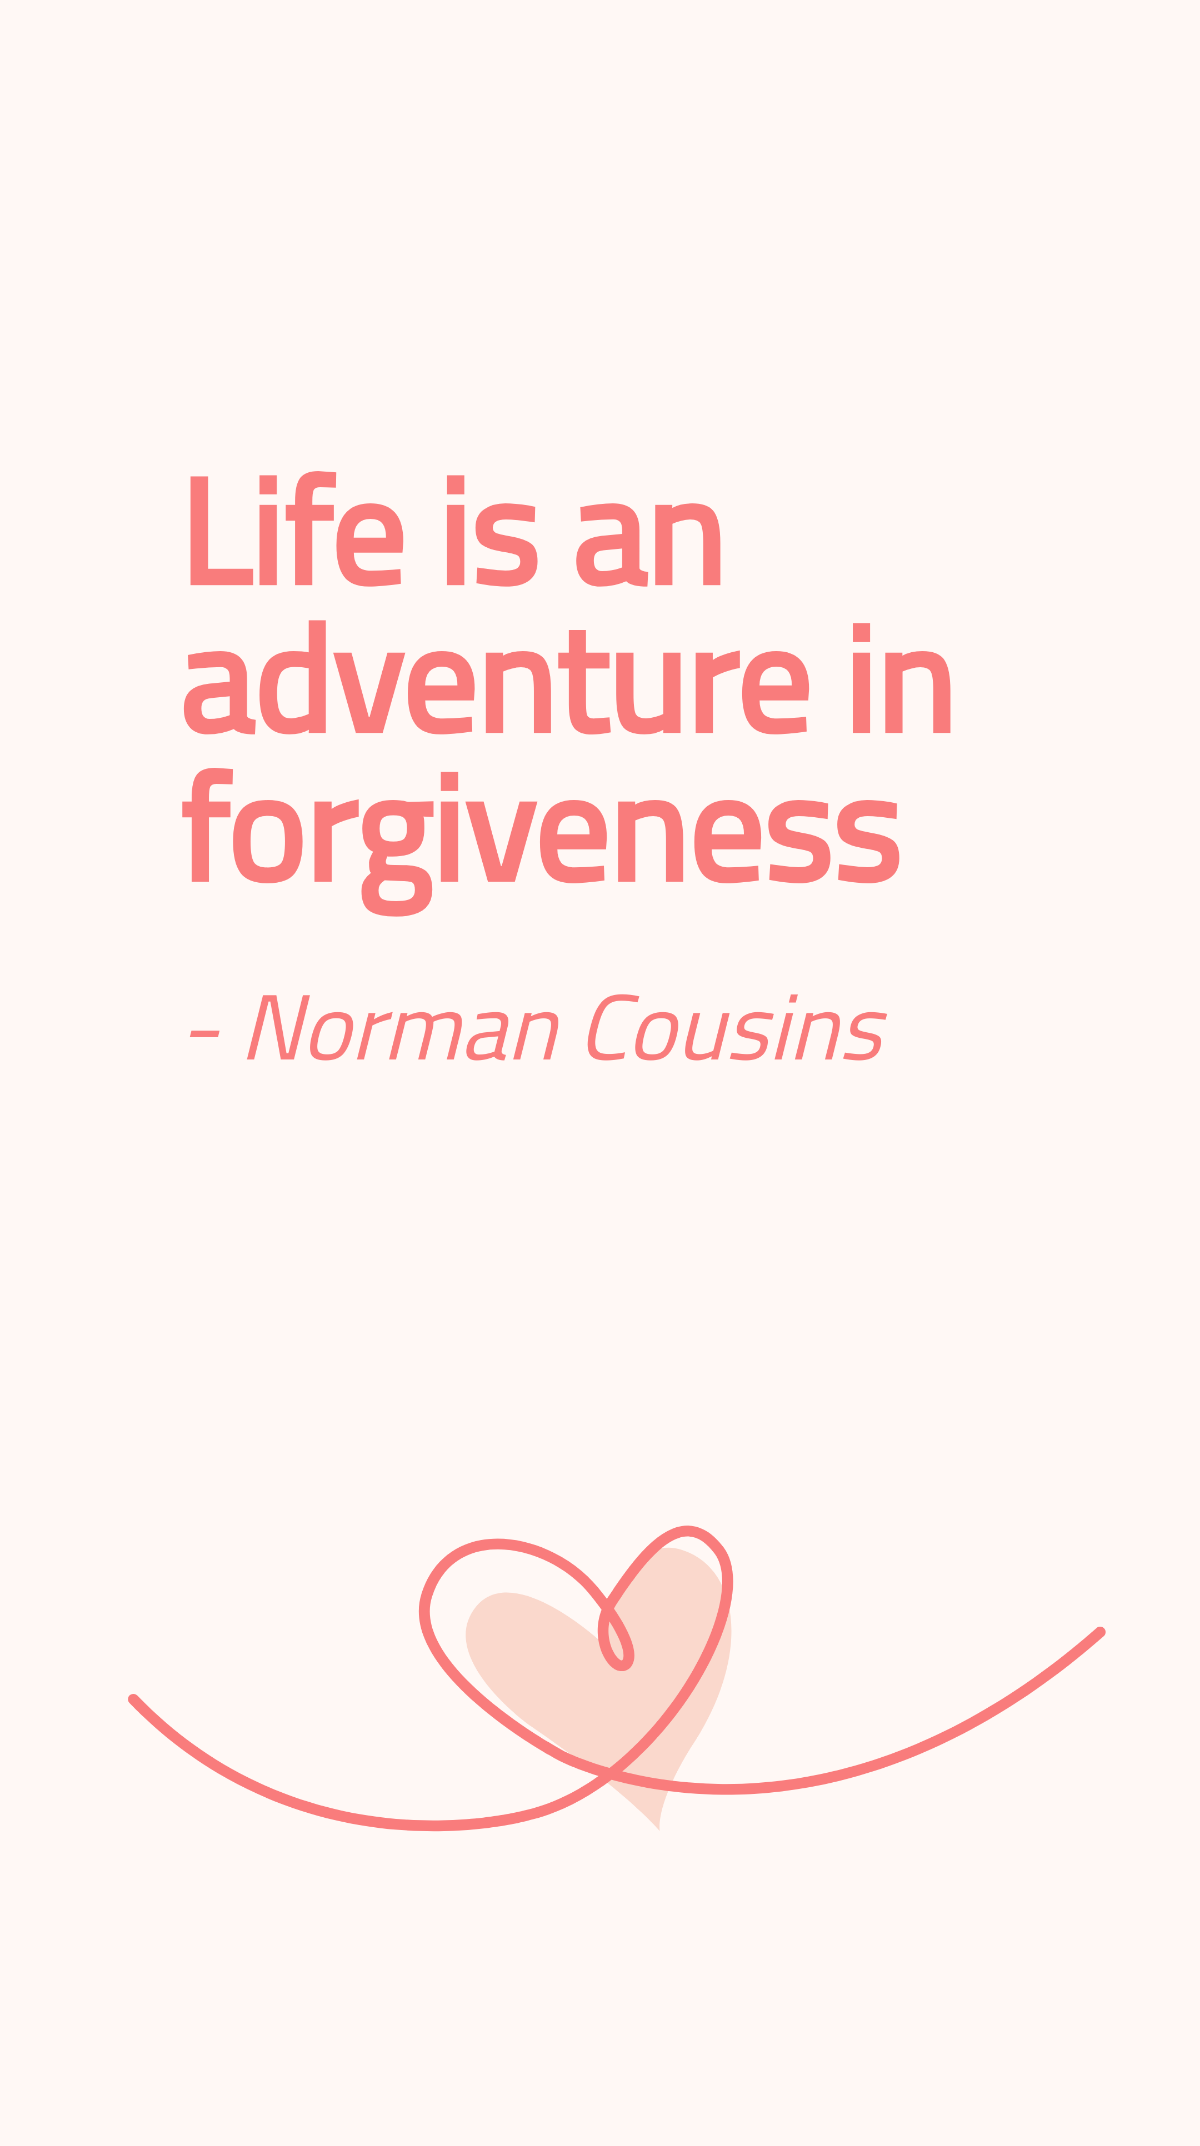 Norman Cousins - Life is an adventure in forgiveness Template